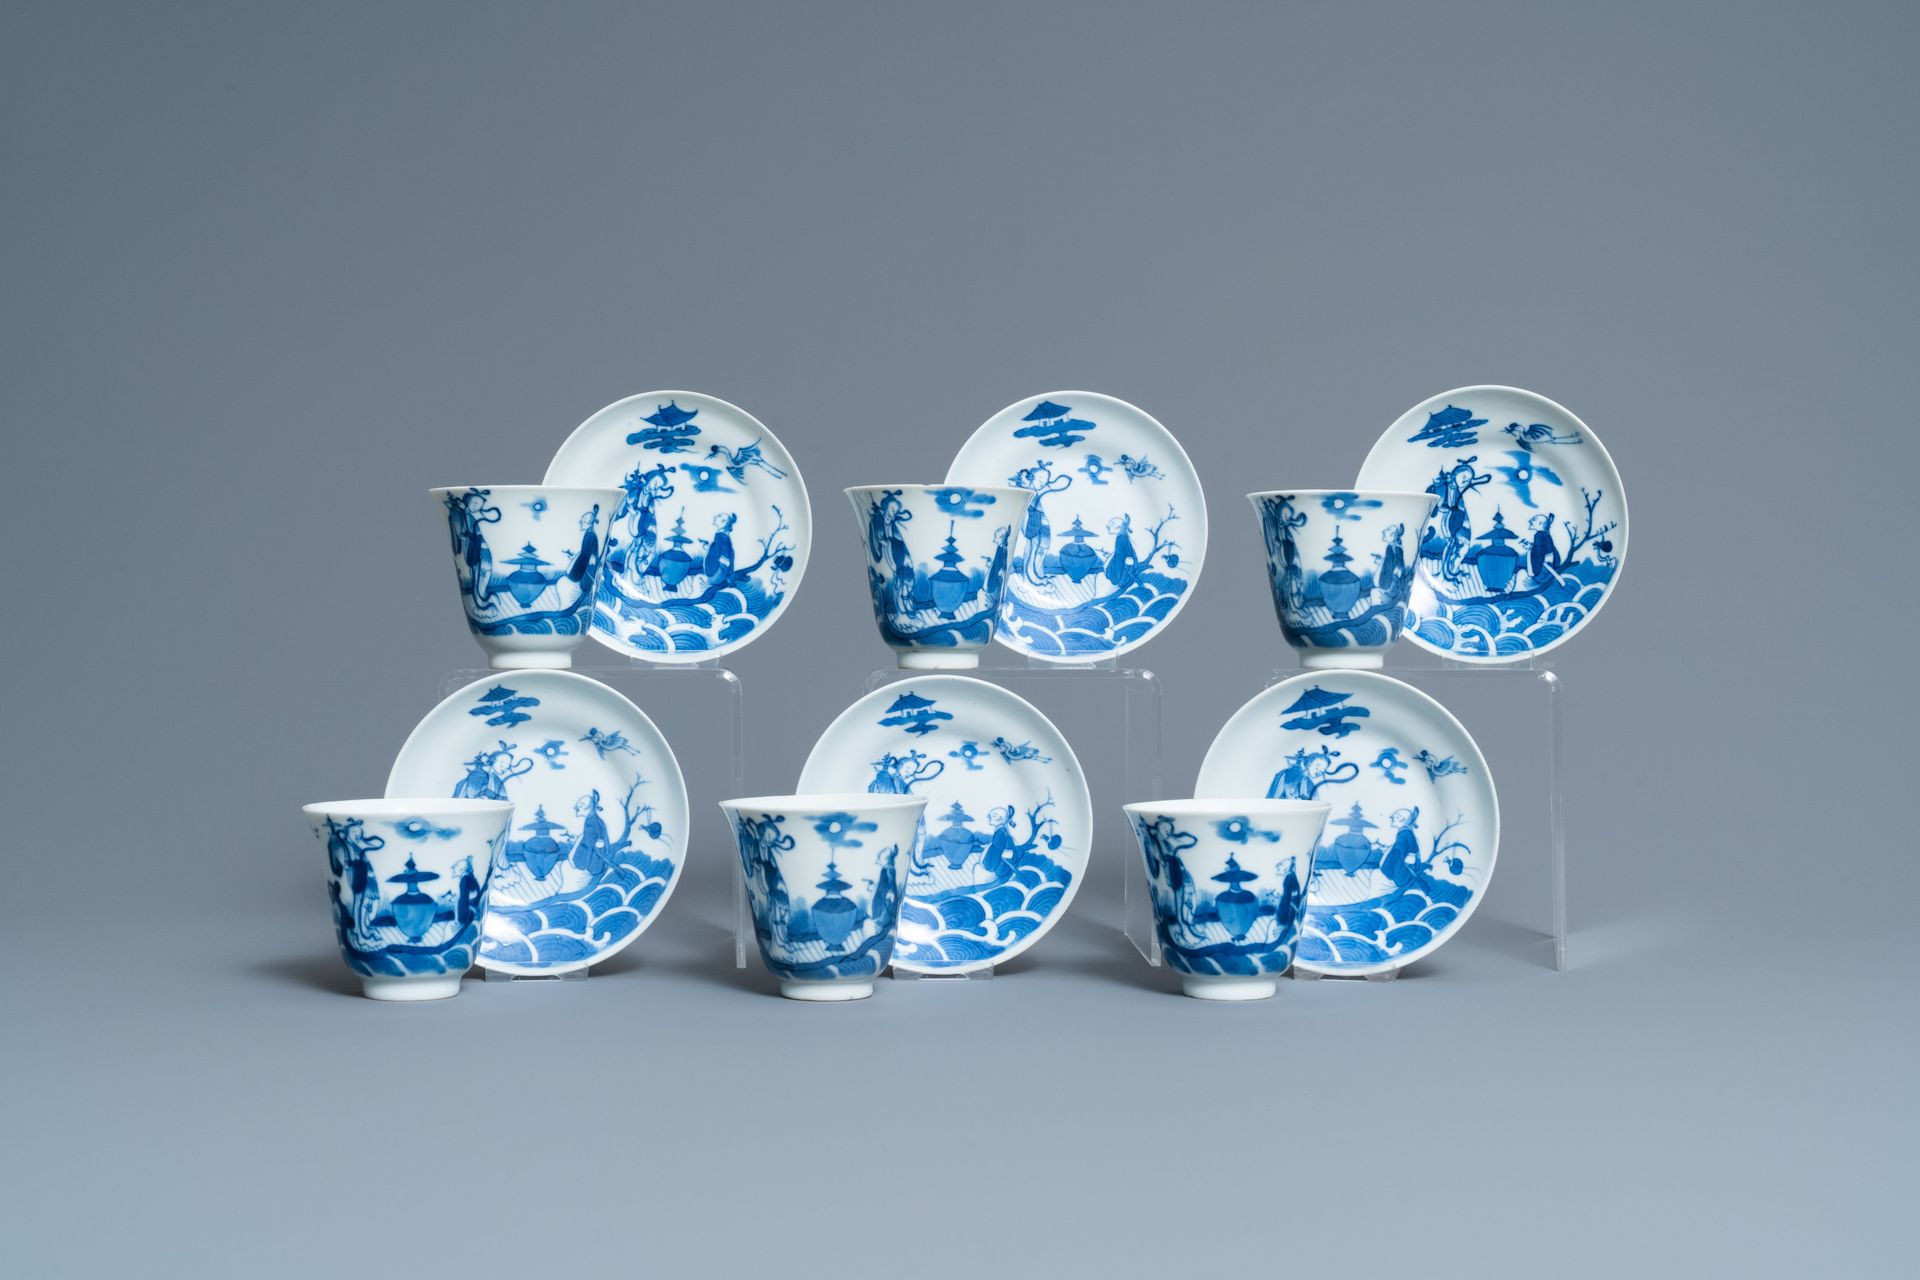 Six Chinese blue and white cups and saucers, 19th C. 全名：六只中国青花杯和碟子，19世纪六个中国青花杯和碟&hellip;